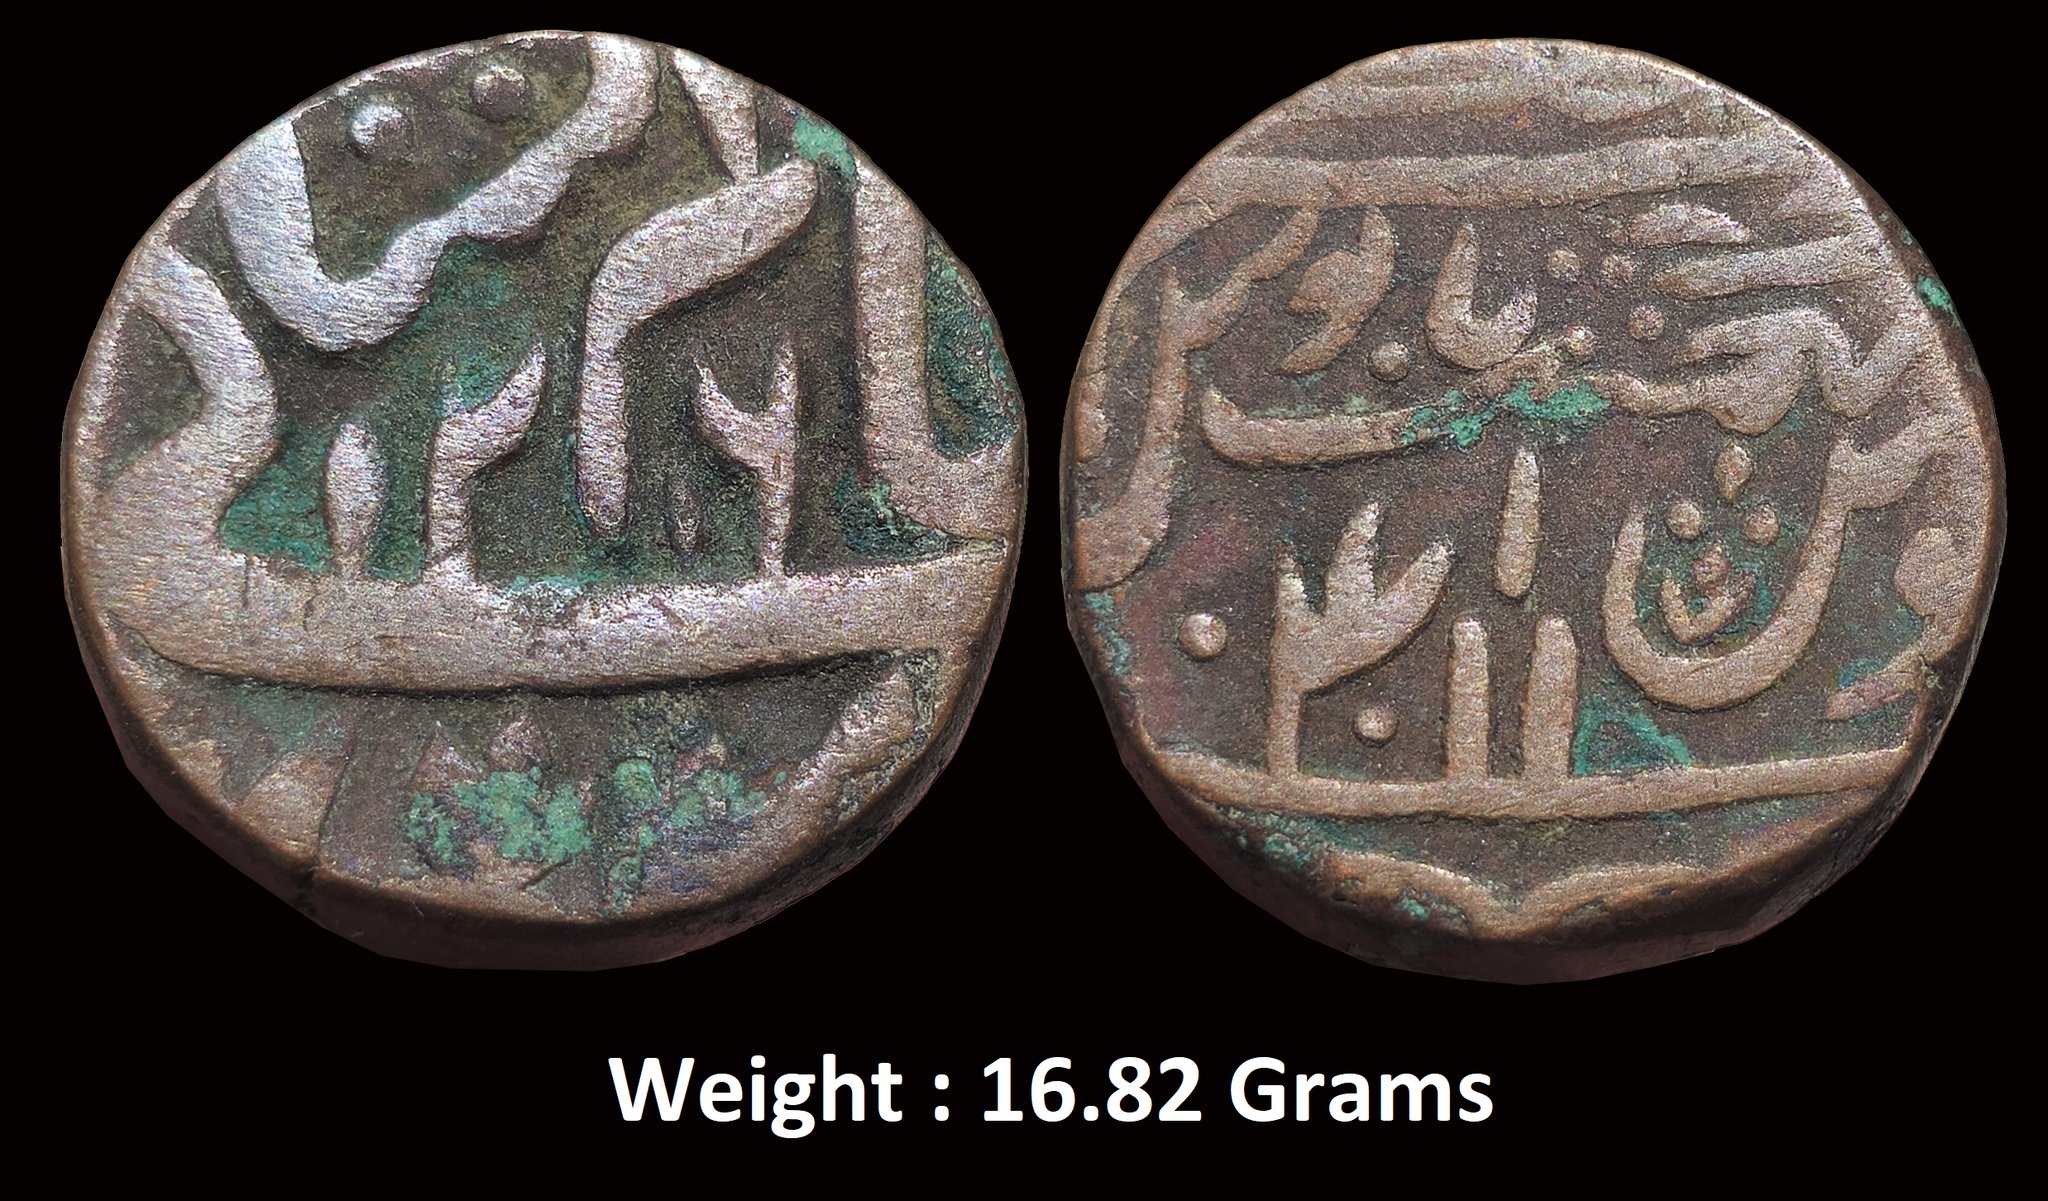 Independent Kingdom : Rohilkhand, Copper Paisa, Ghausgarh (pseudo mintname Najibabad) ; INO Shah Alam II, AH 1216 / 40 RY (RY & AH mismatch) with dagger to the right of RY on reverse
KM Unlisted. Very Scarce ; Weight : 16.82 Grams